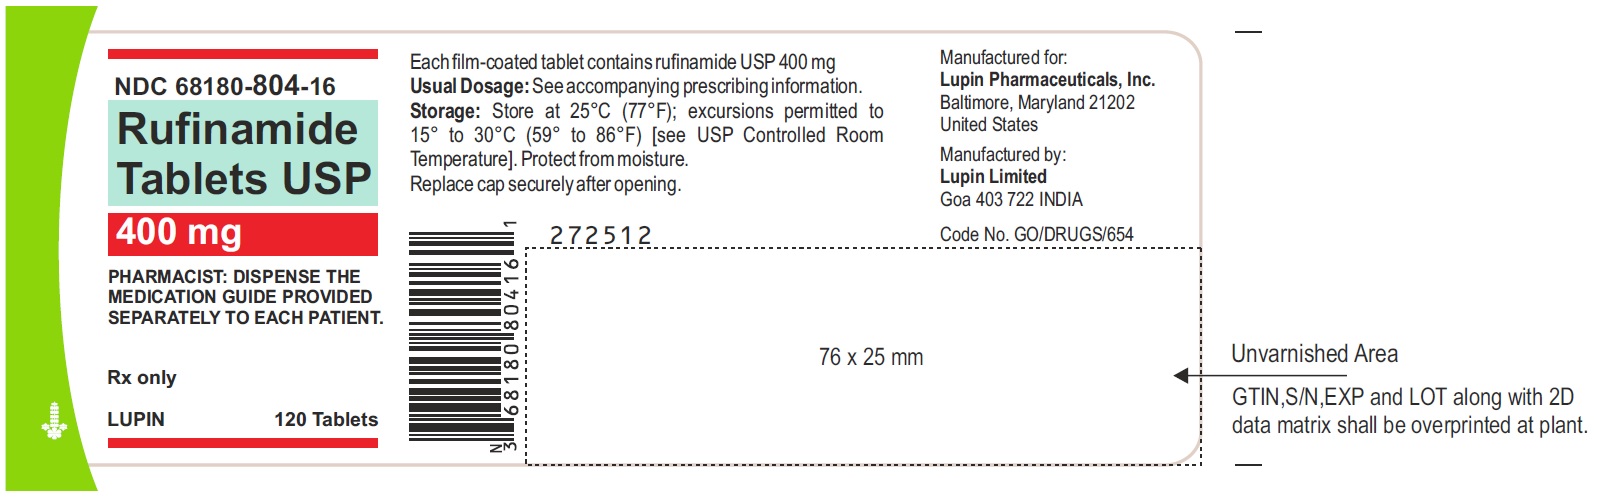 NDC 68180-804-16
Container Label of 120 Tablets